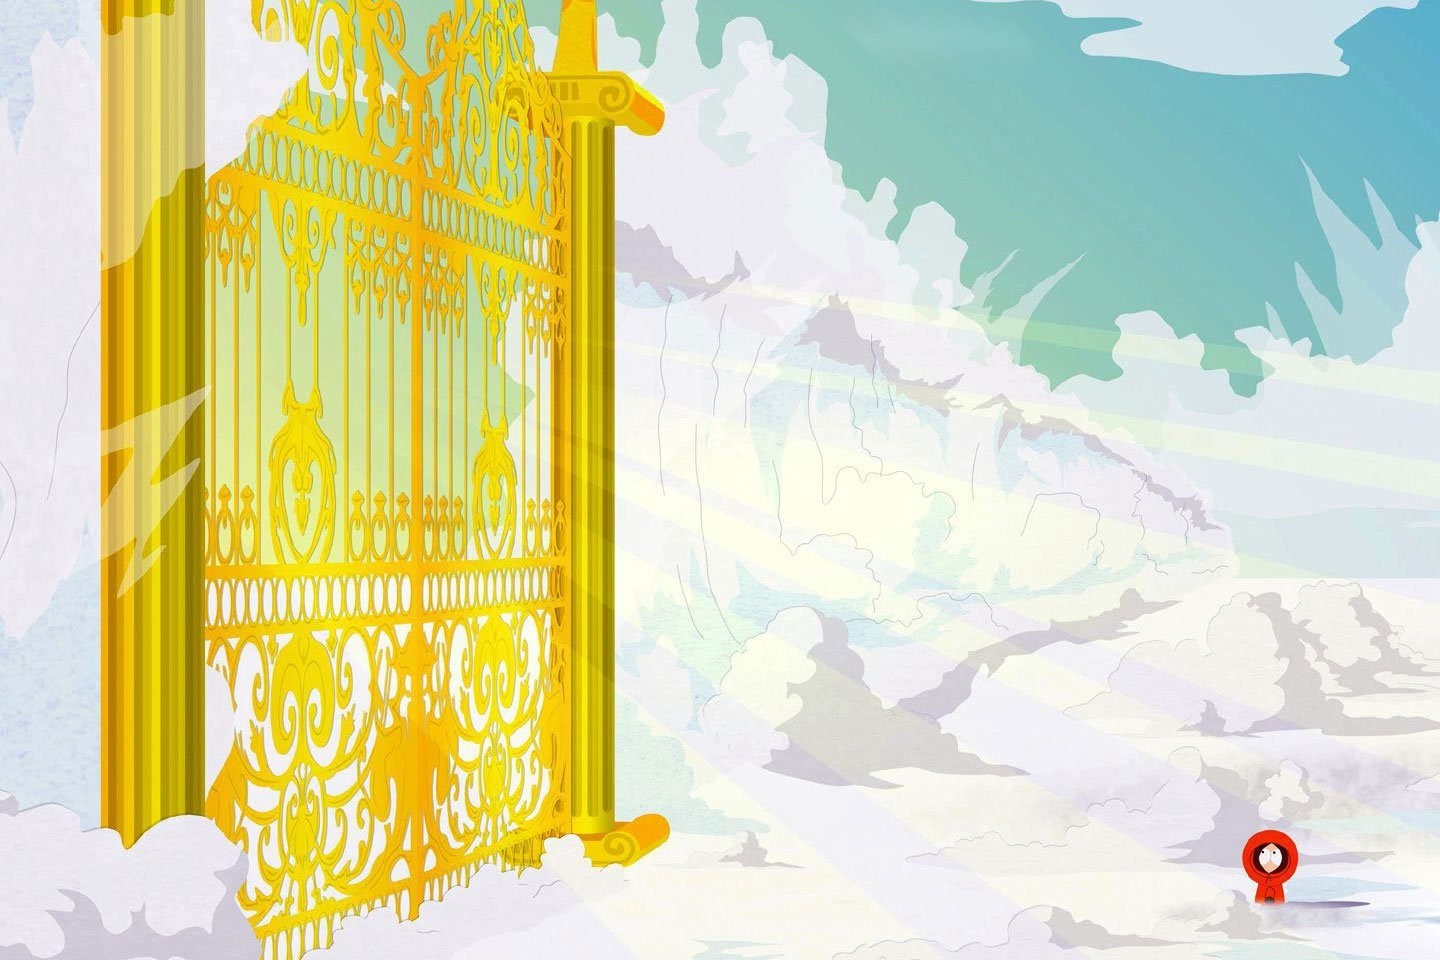 South Park, Kenny McCormick, Clouds, Gates Wallpaper